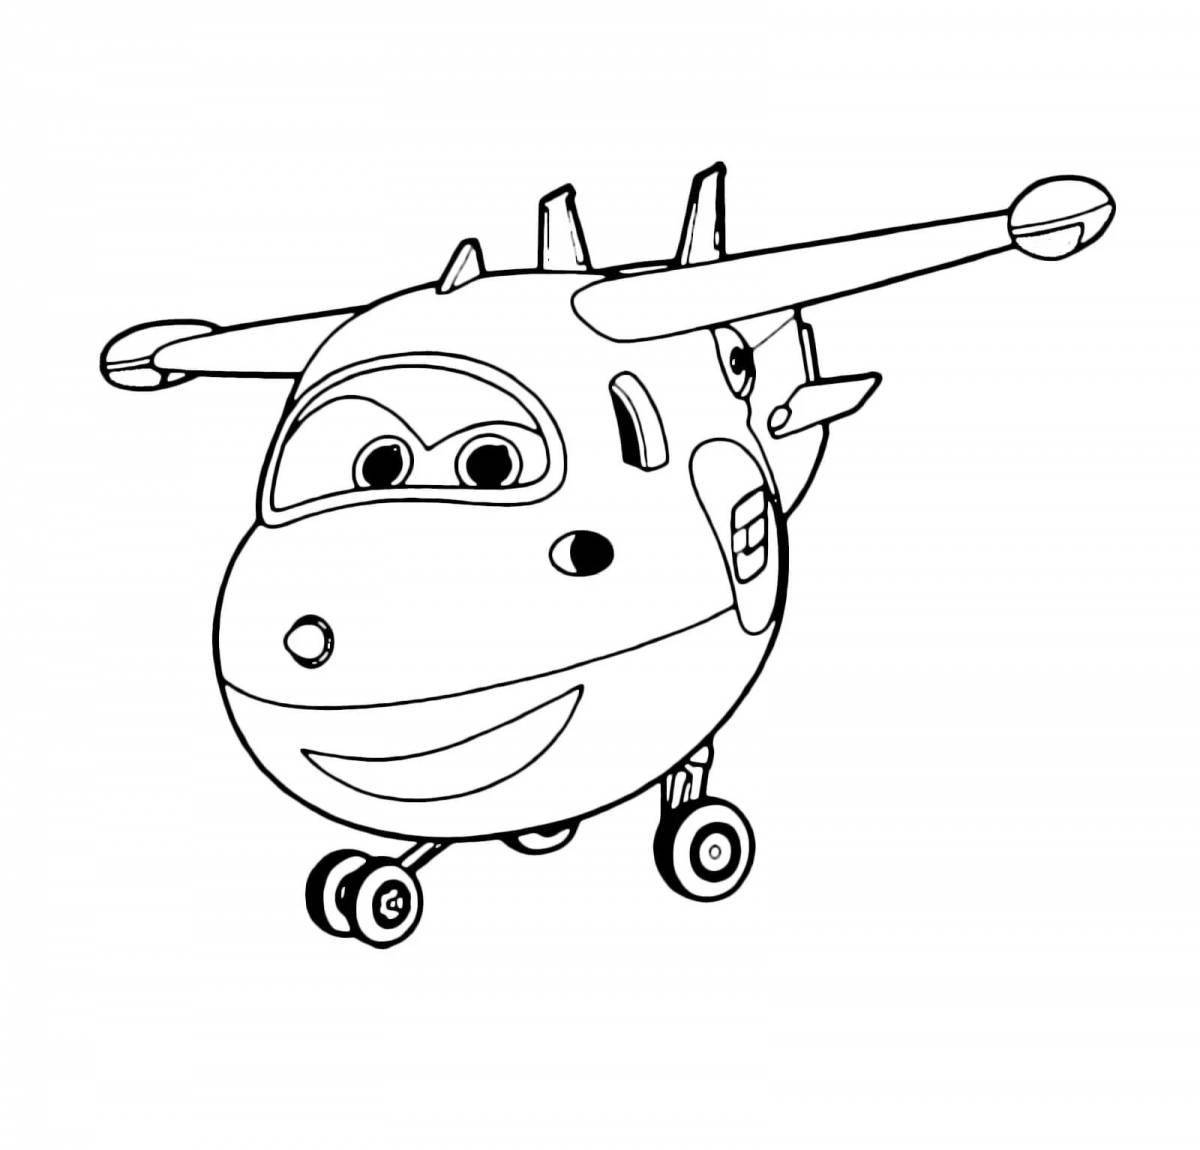 Outstanding Donnie Super Wings coloring page